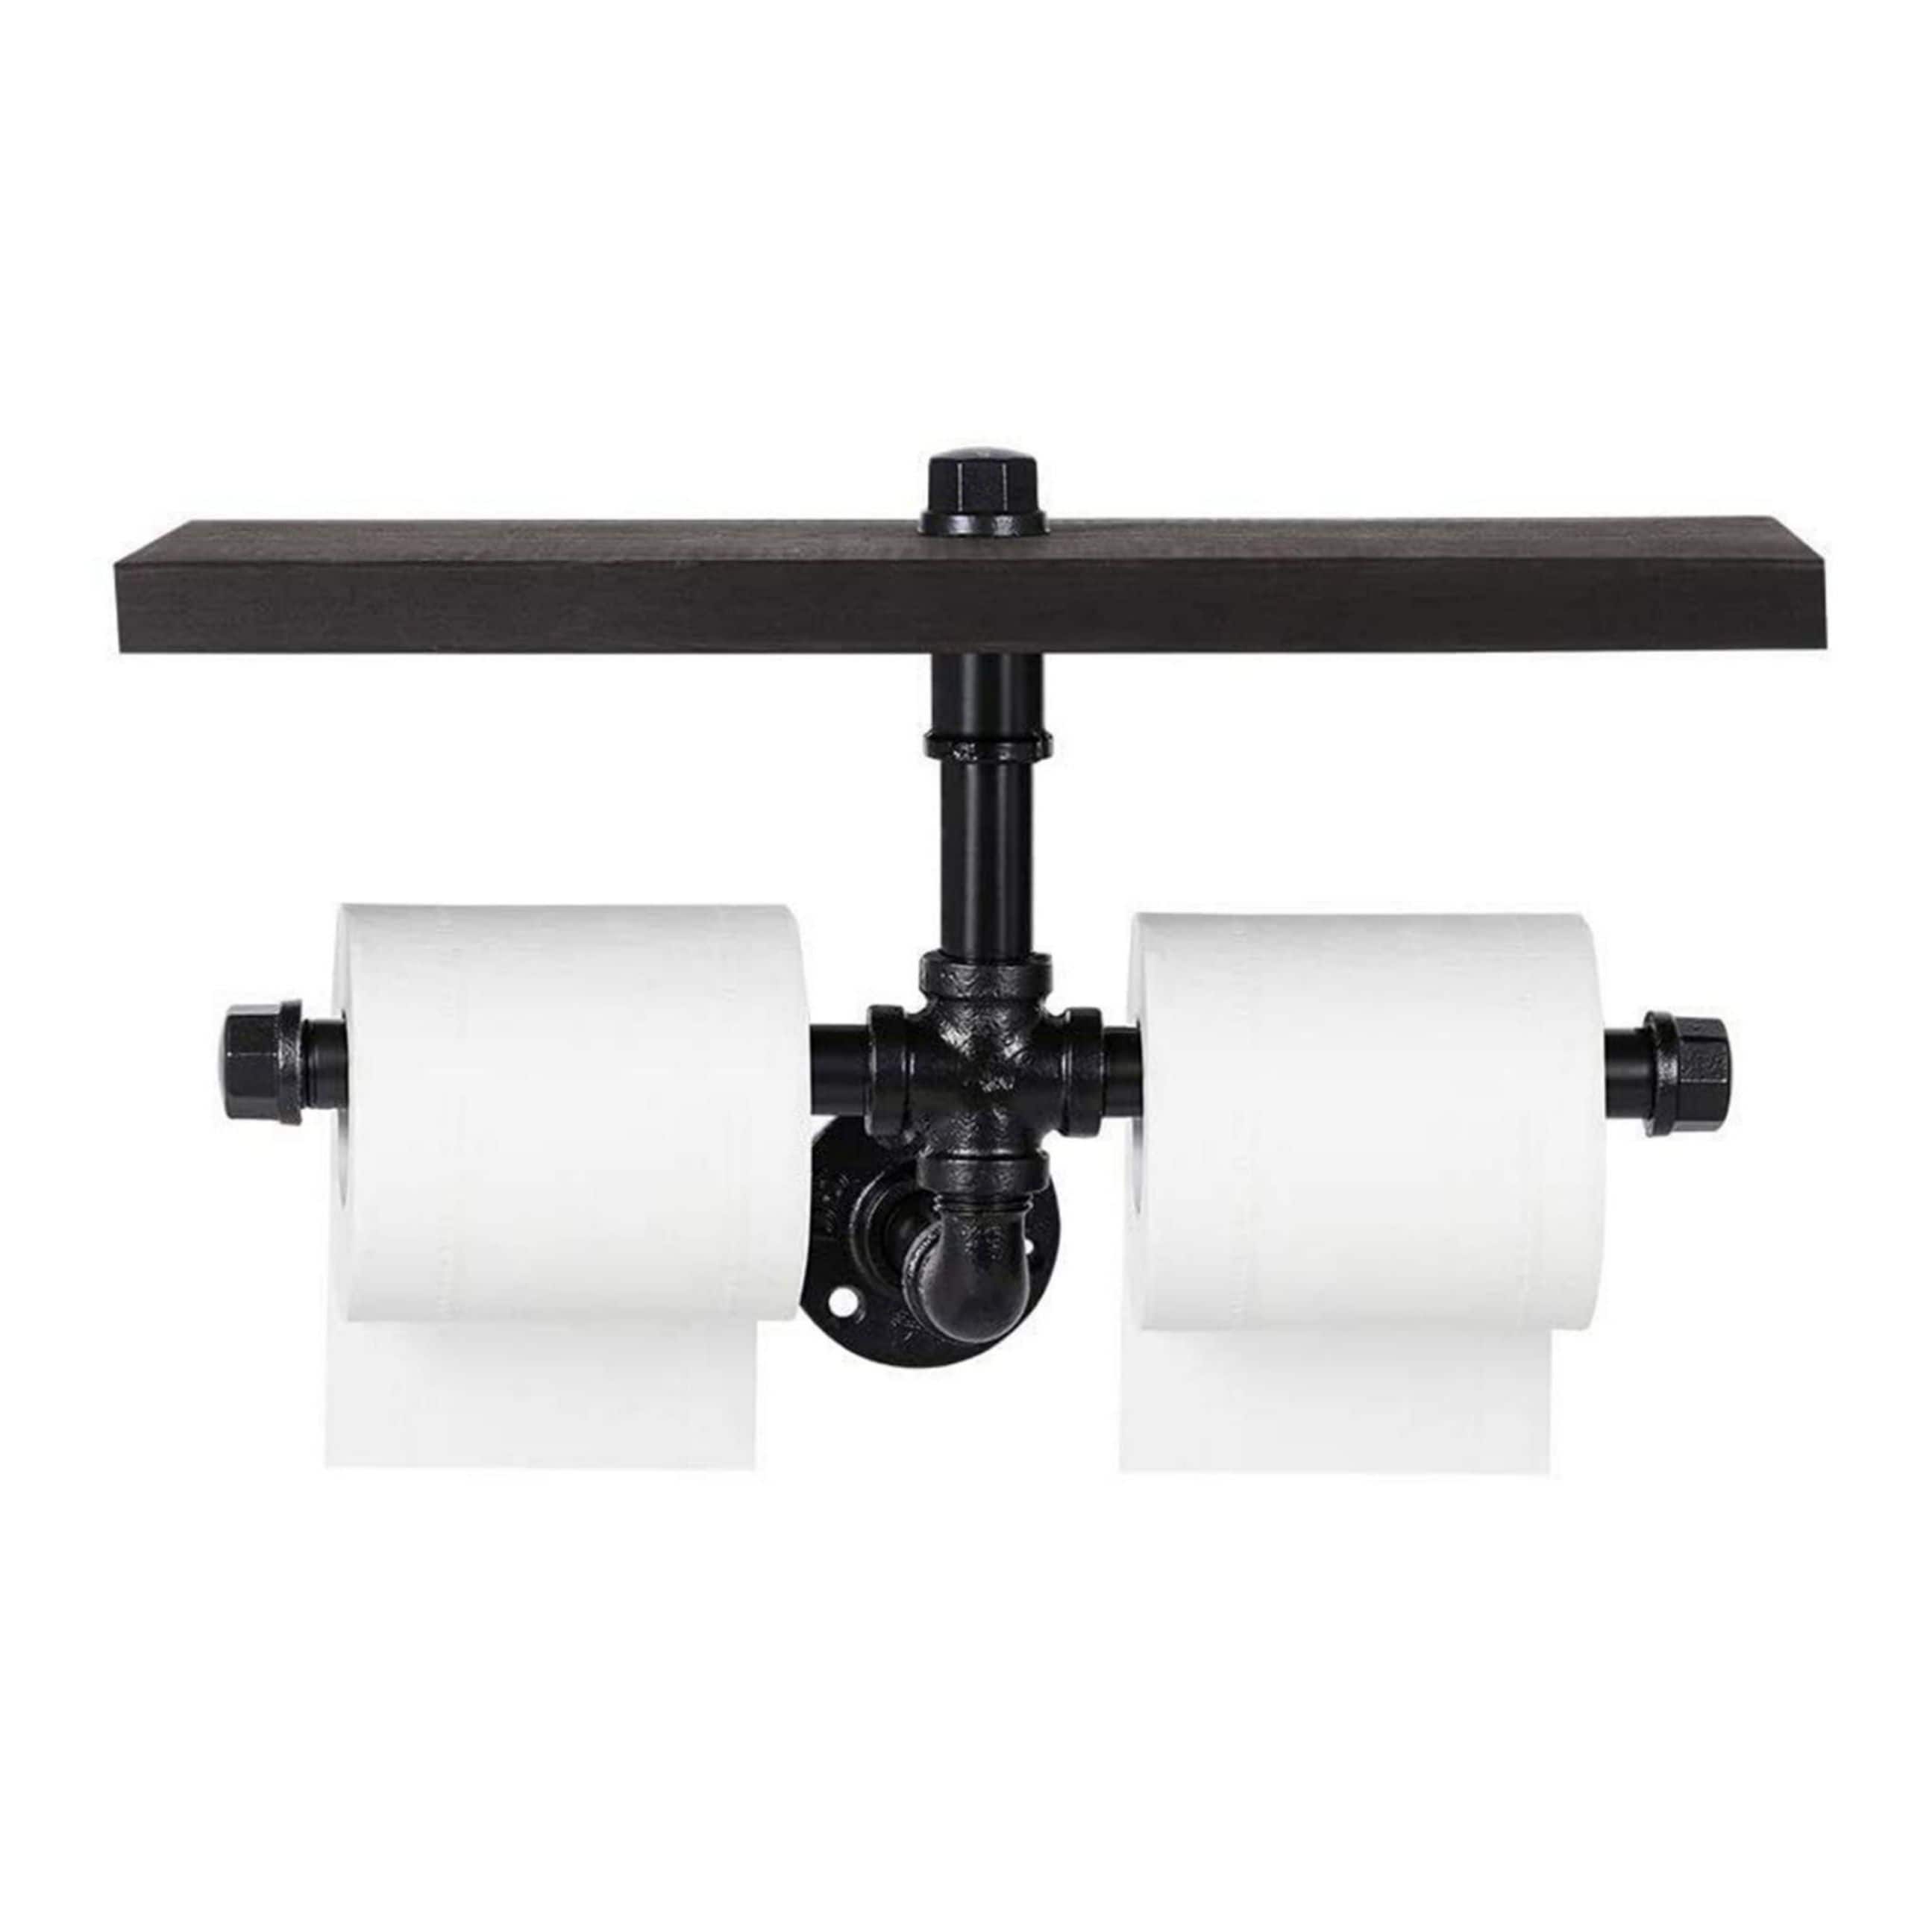 Black Wall Mounted Industrial Dual Toilet Paper Holder with Storage Shelf